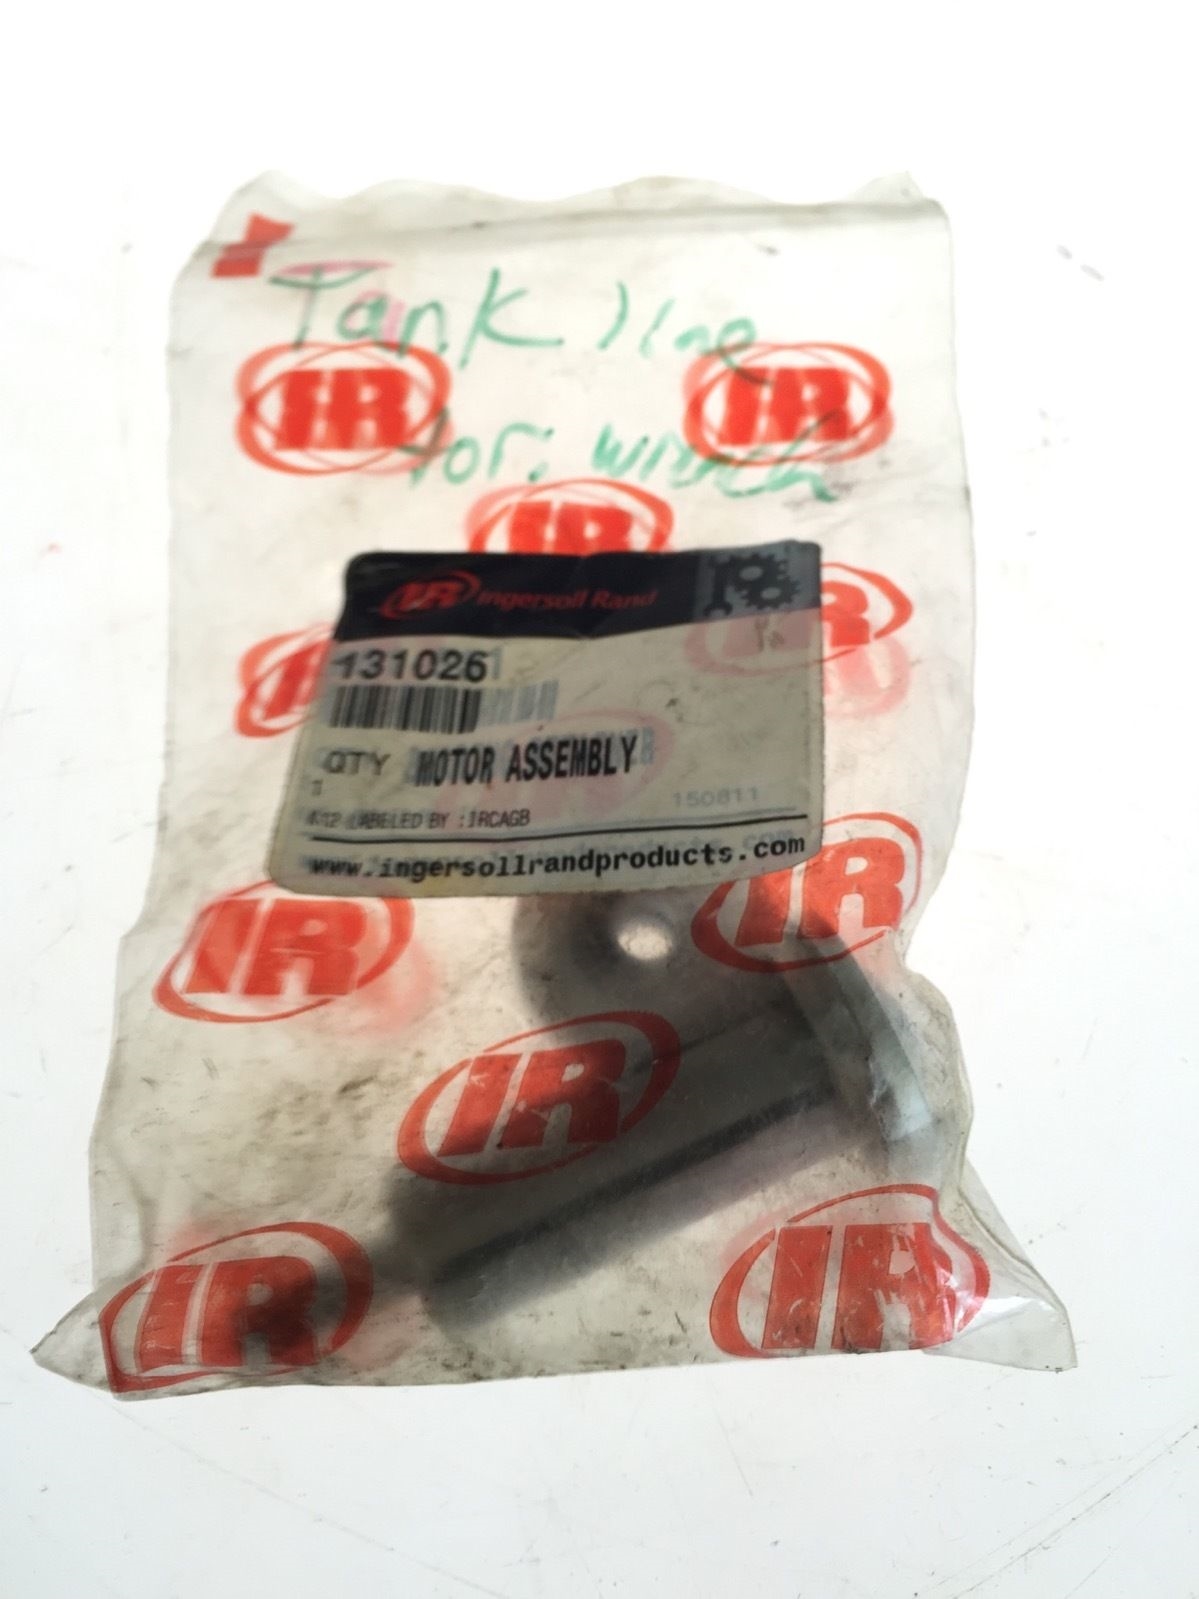 NEW IN BAG Ingersoll Rand 131026 MOTOR ASSEMBLY 394 ASSEMBLY TOOL PART, (F12) 1